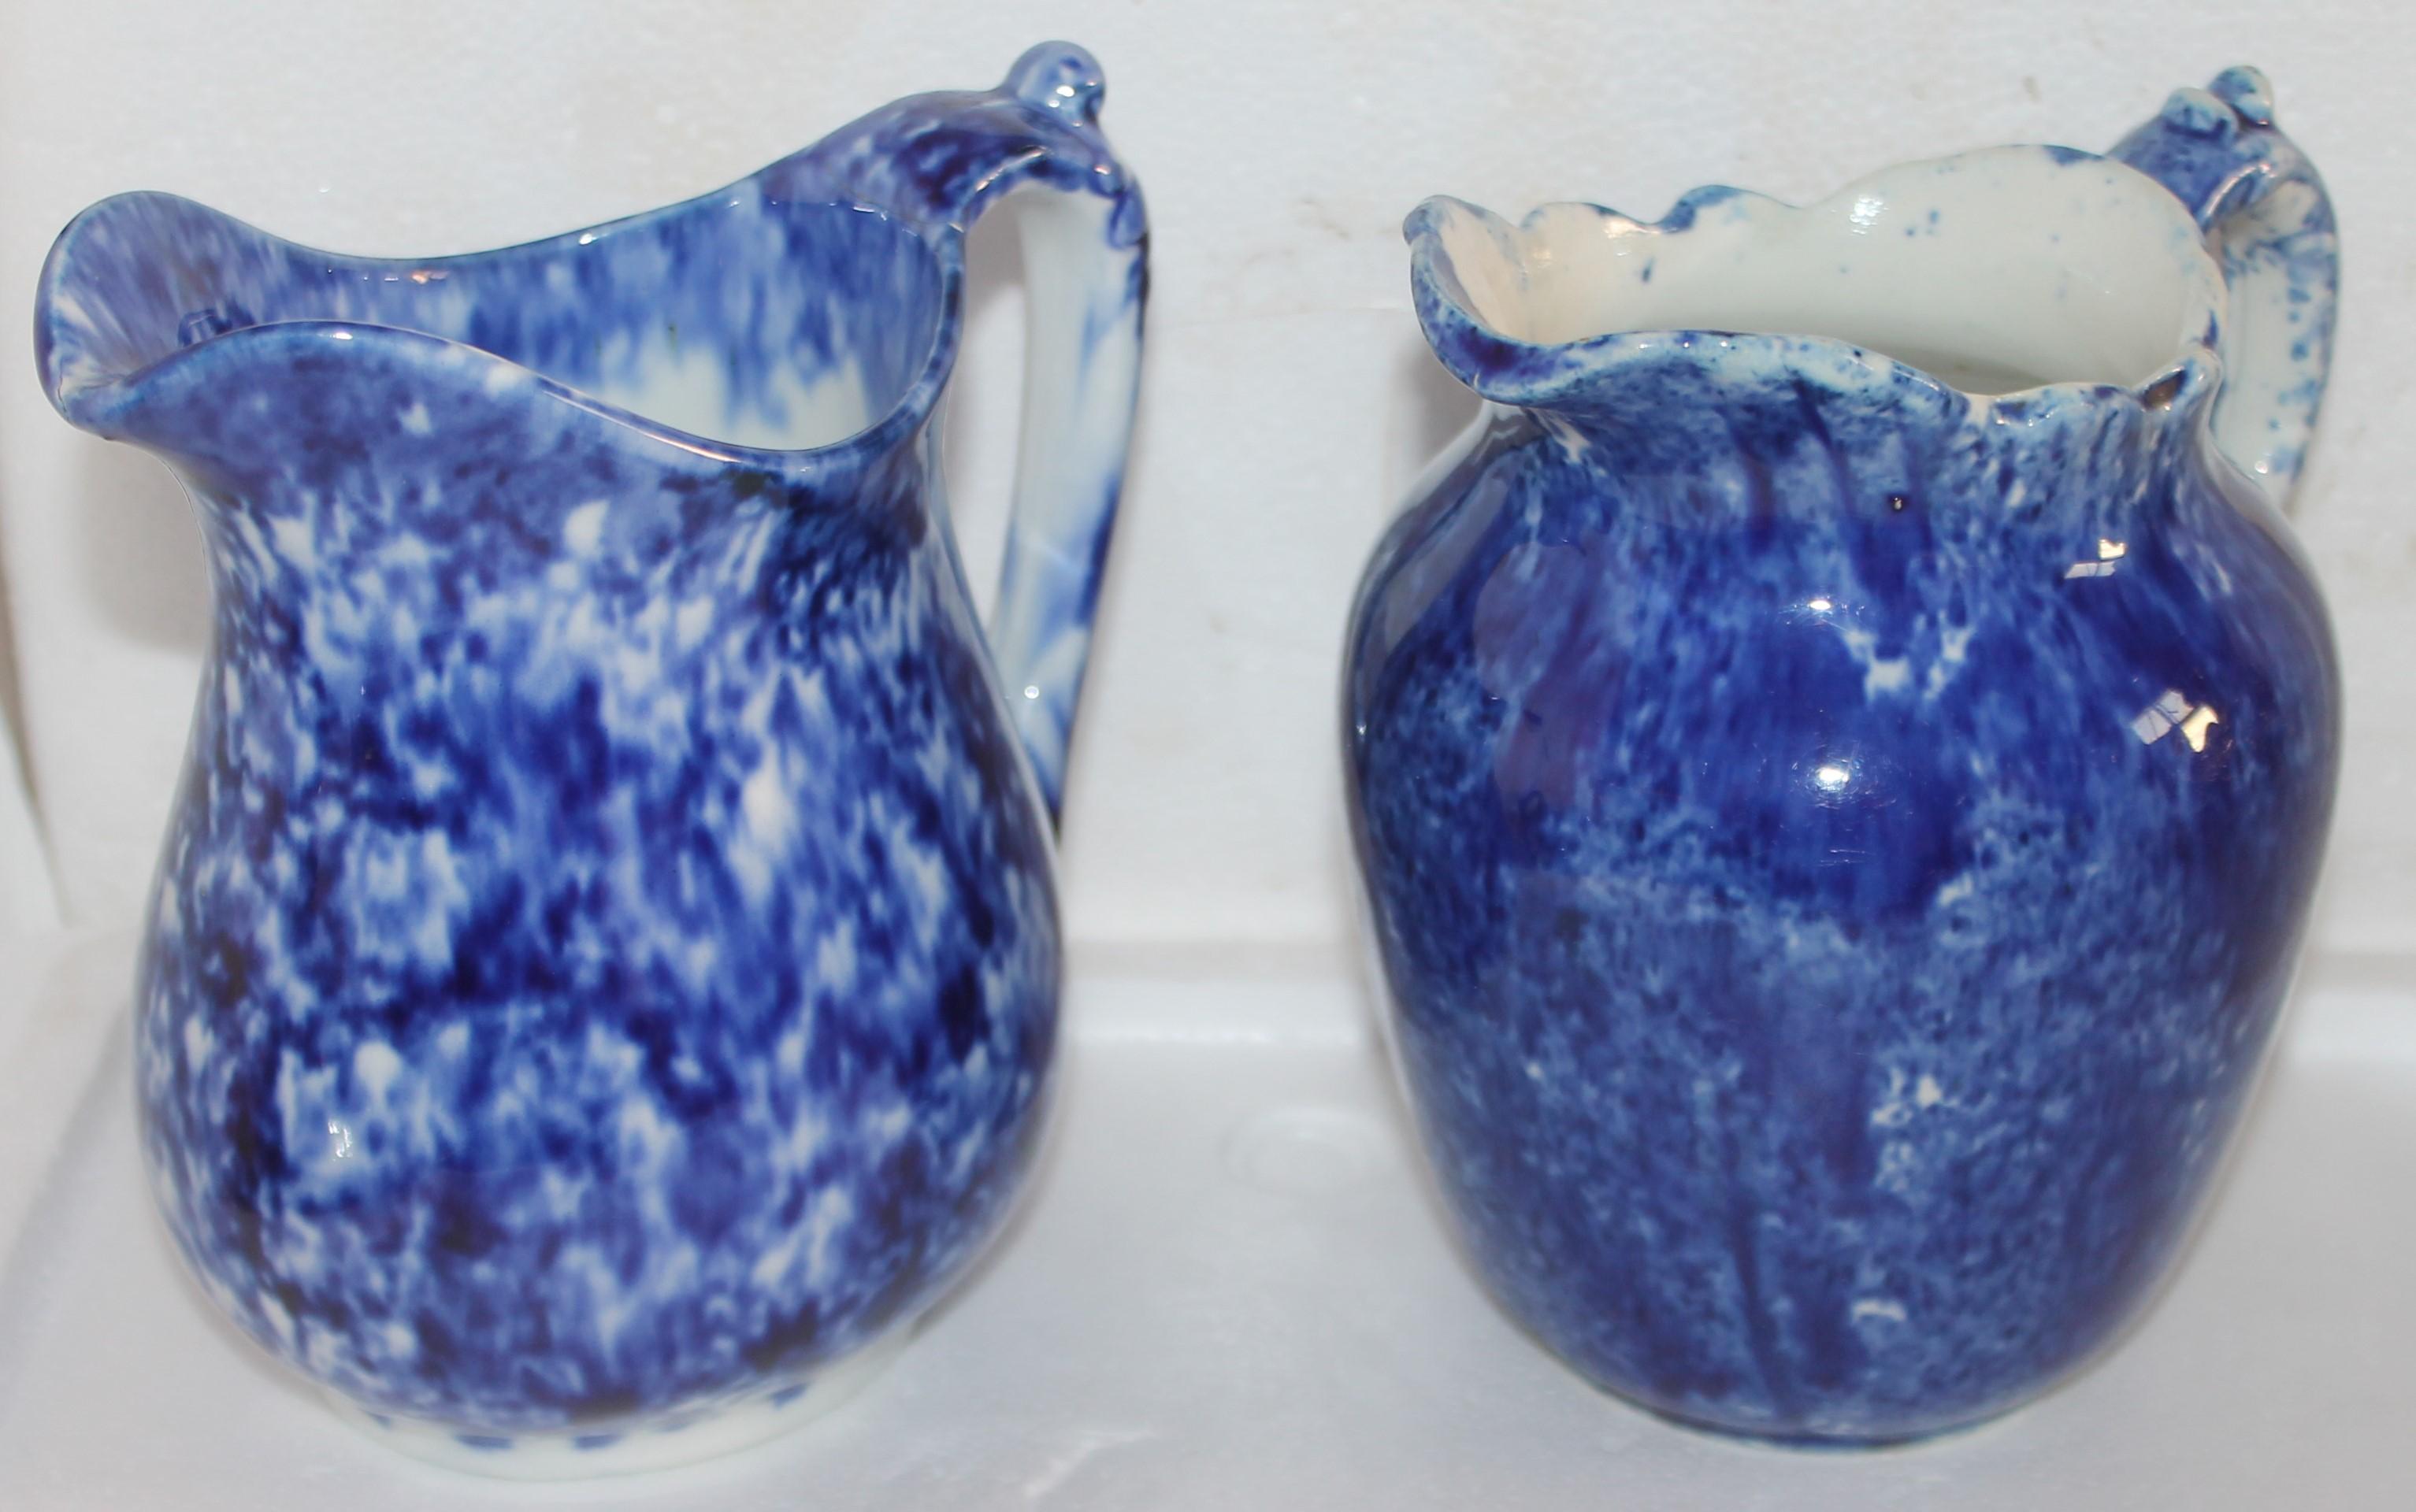 American Collection of 19thc Sponge Ware Pitchers, 6 Pieces For Sale